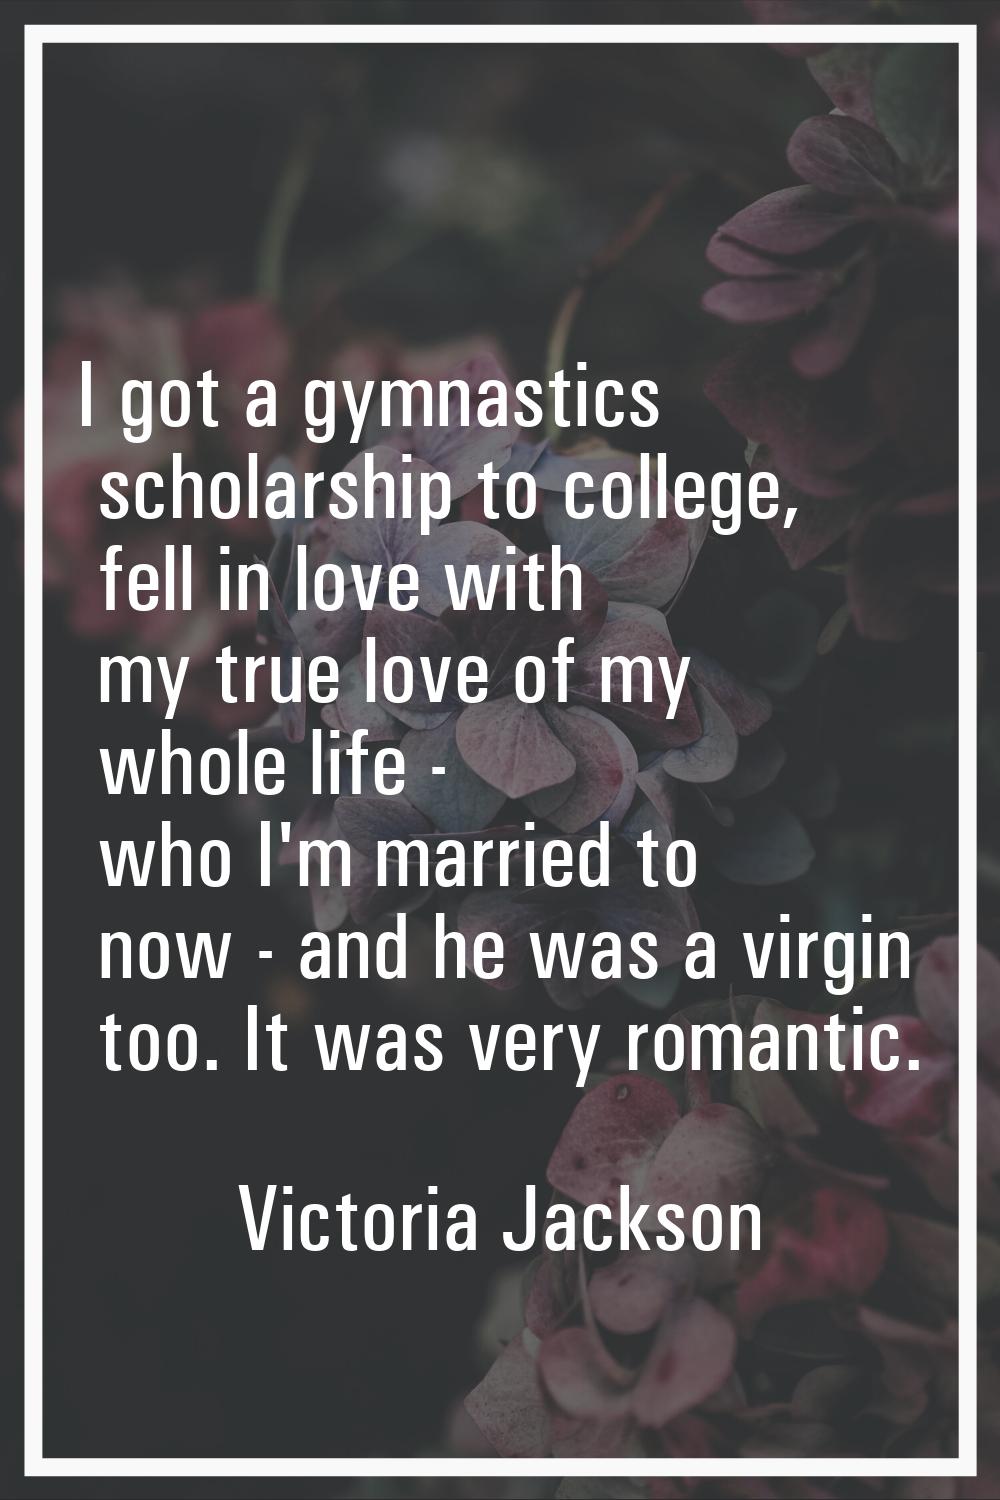 I got a gymnastics scholarship to college, fell in love with my true love of my whole life - who I'